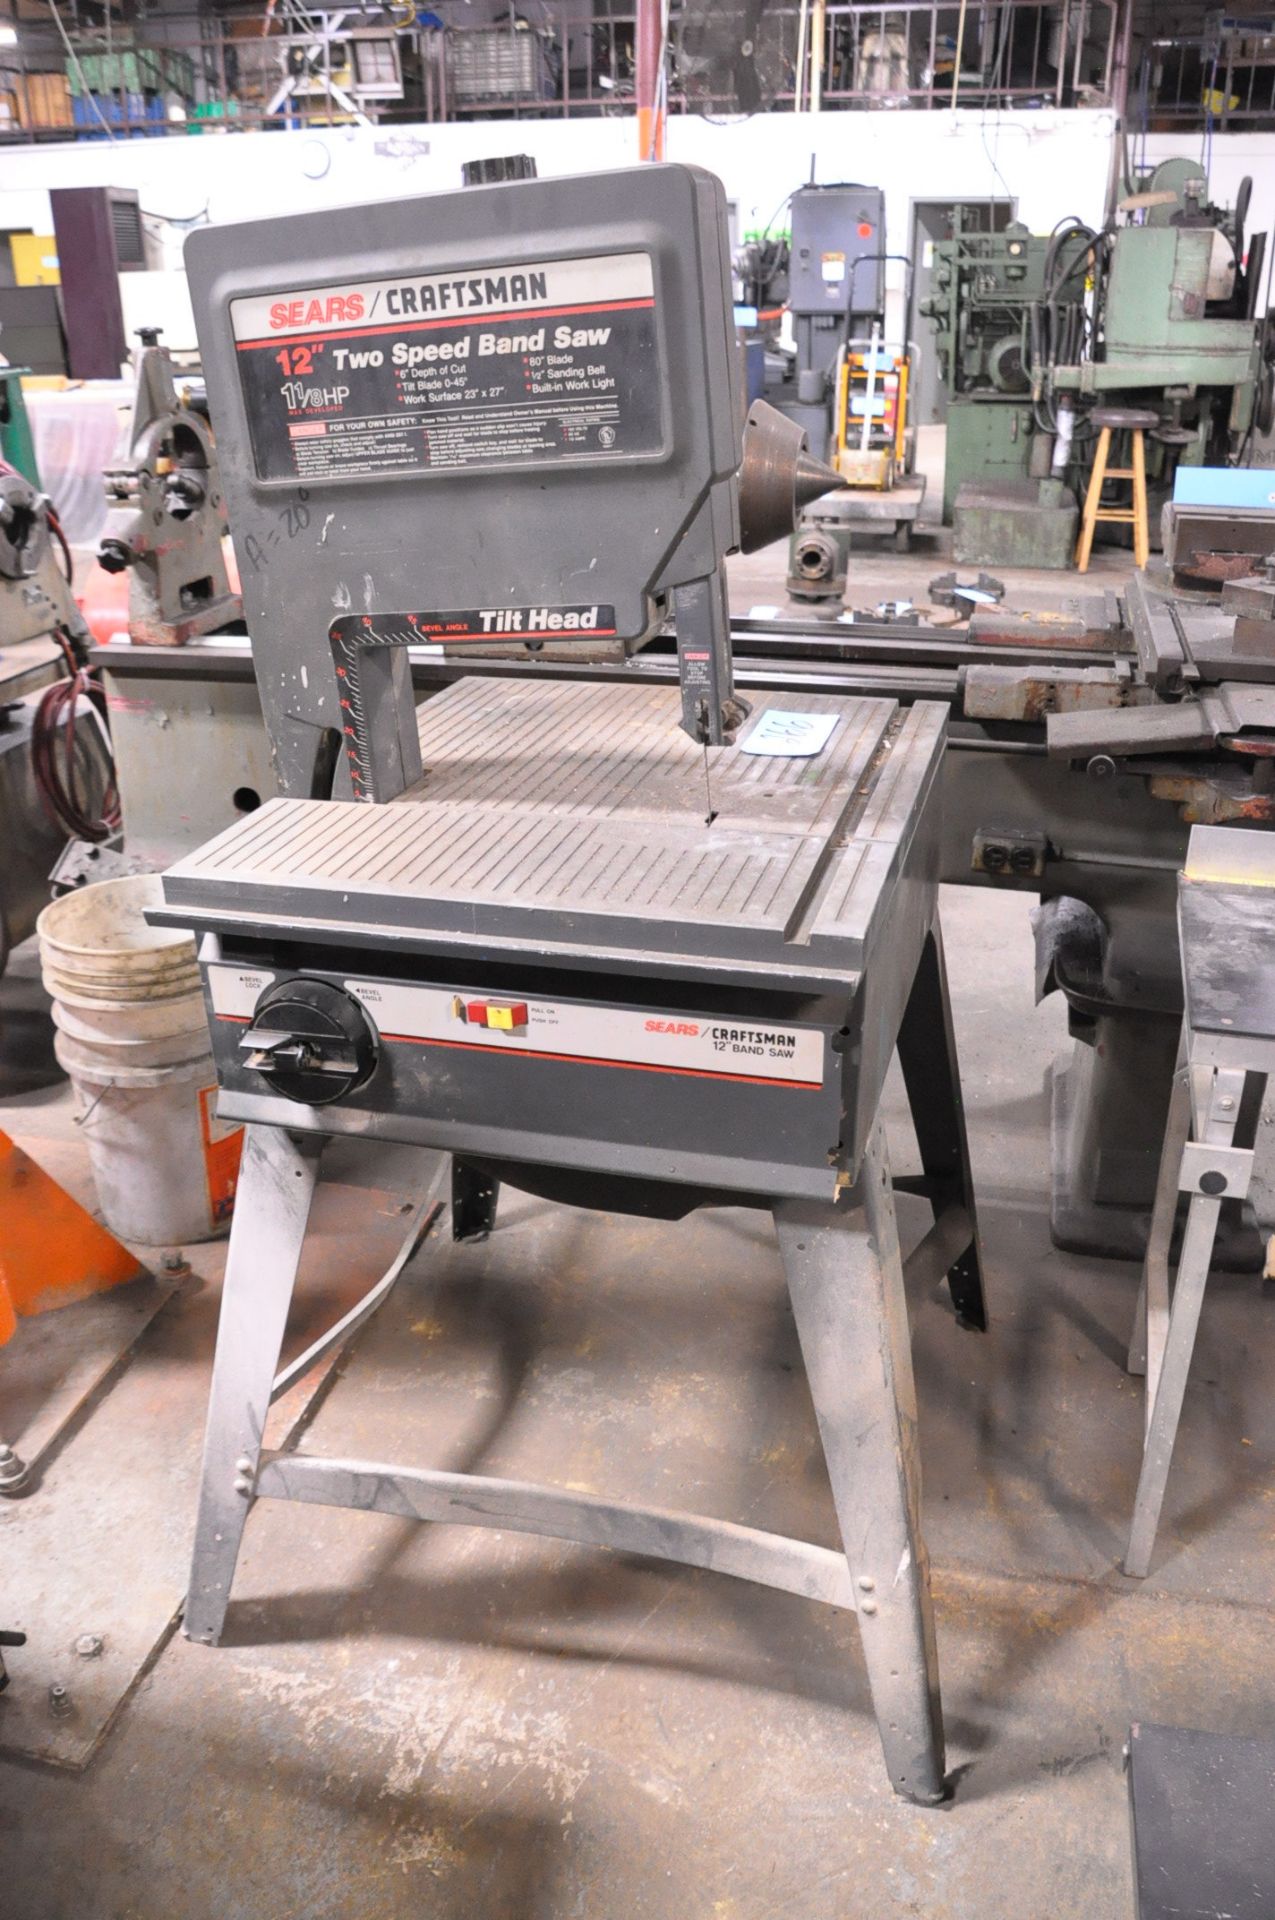 Sears Craftsman 12" 2-Speed Vertical Contour Wood Cutting Band Saw